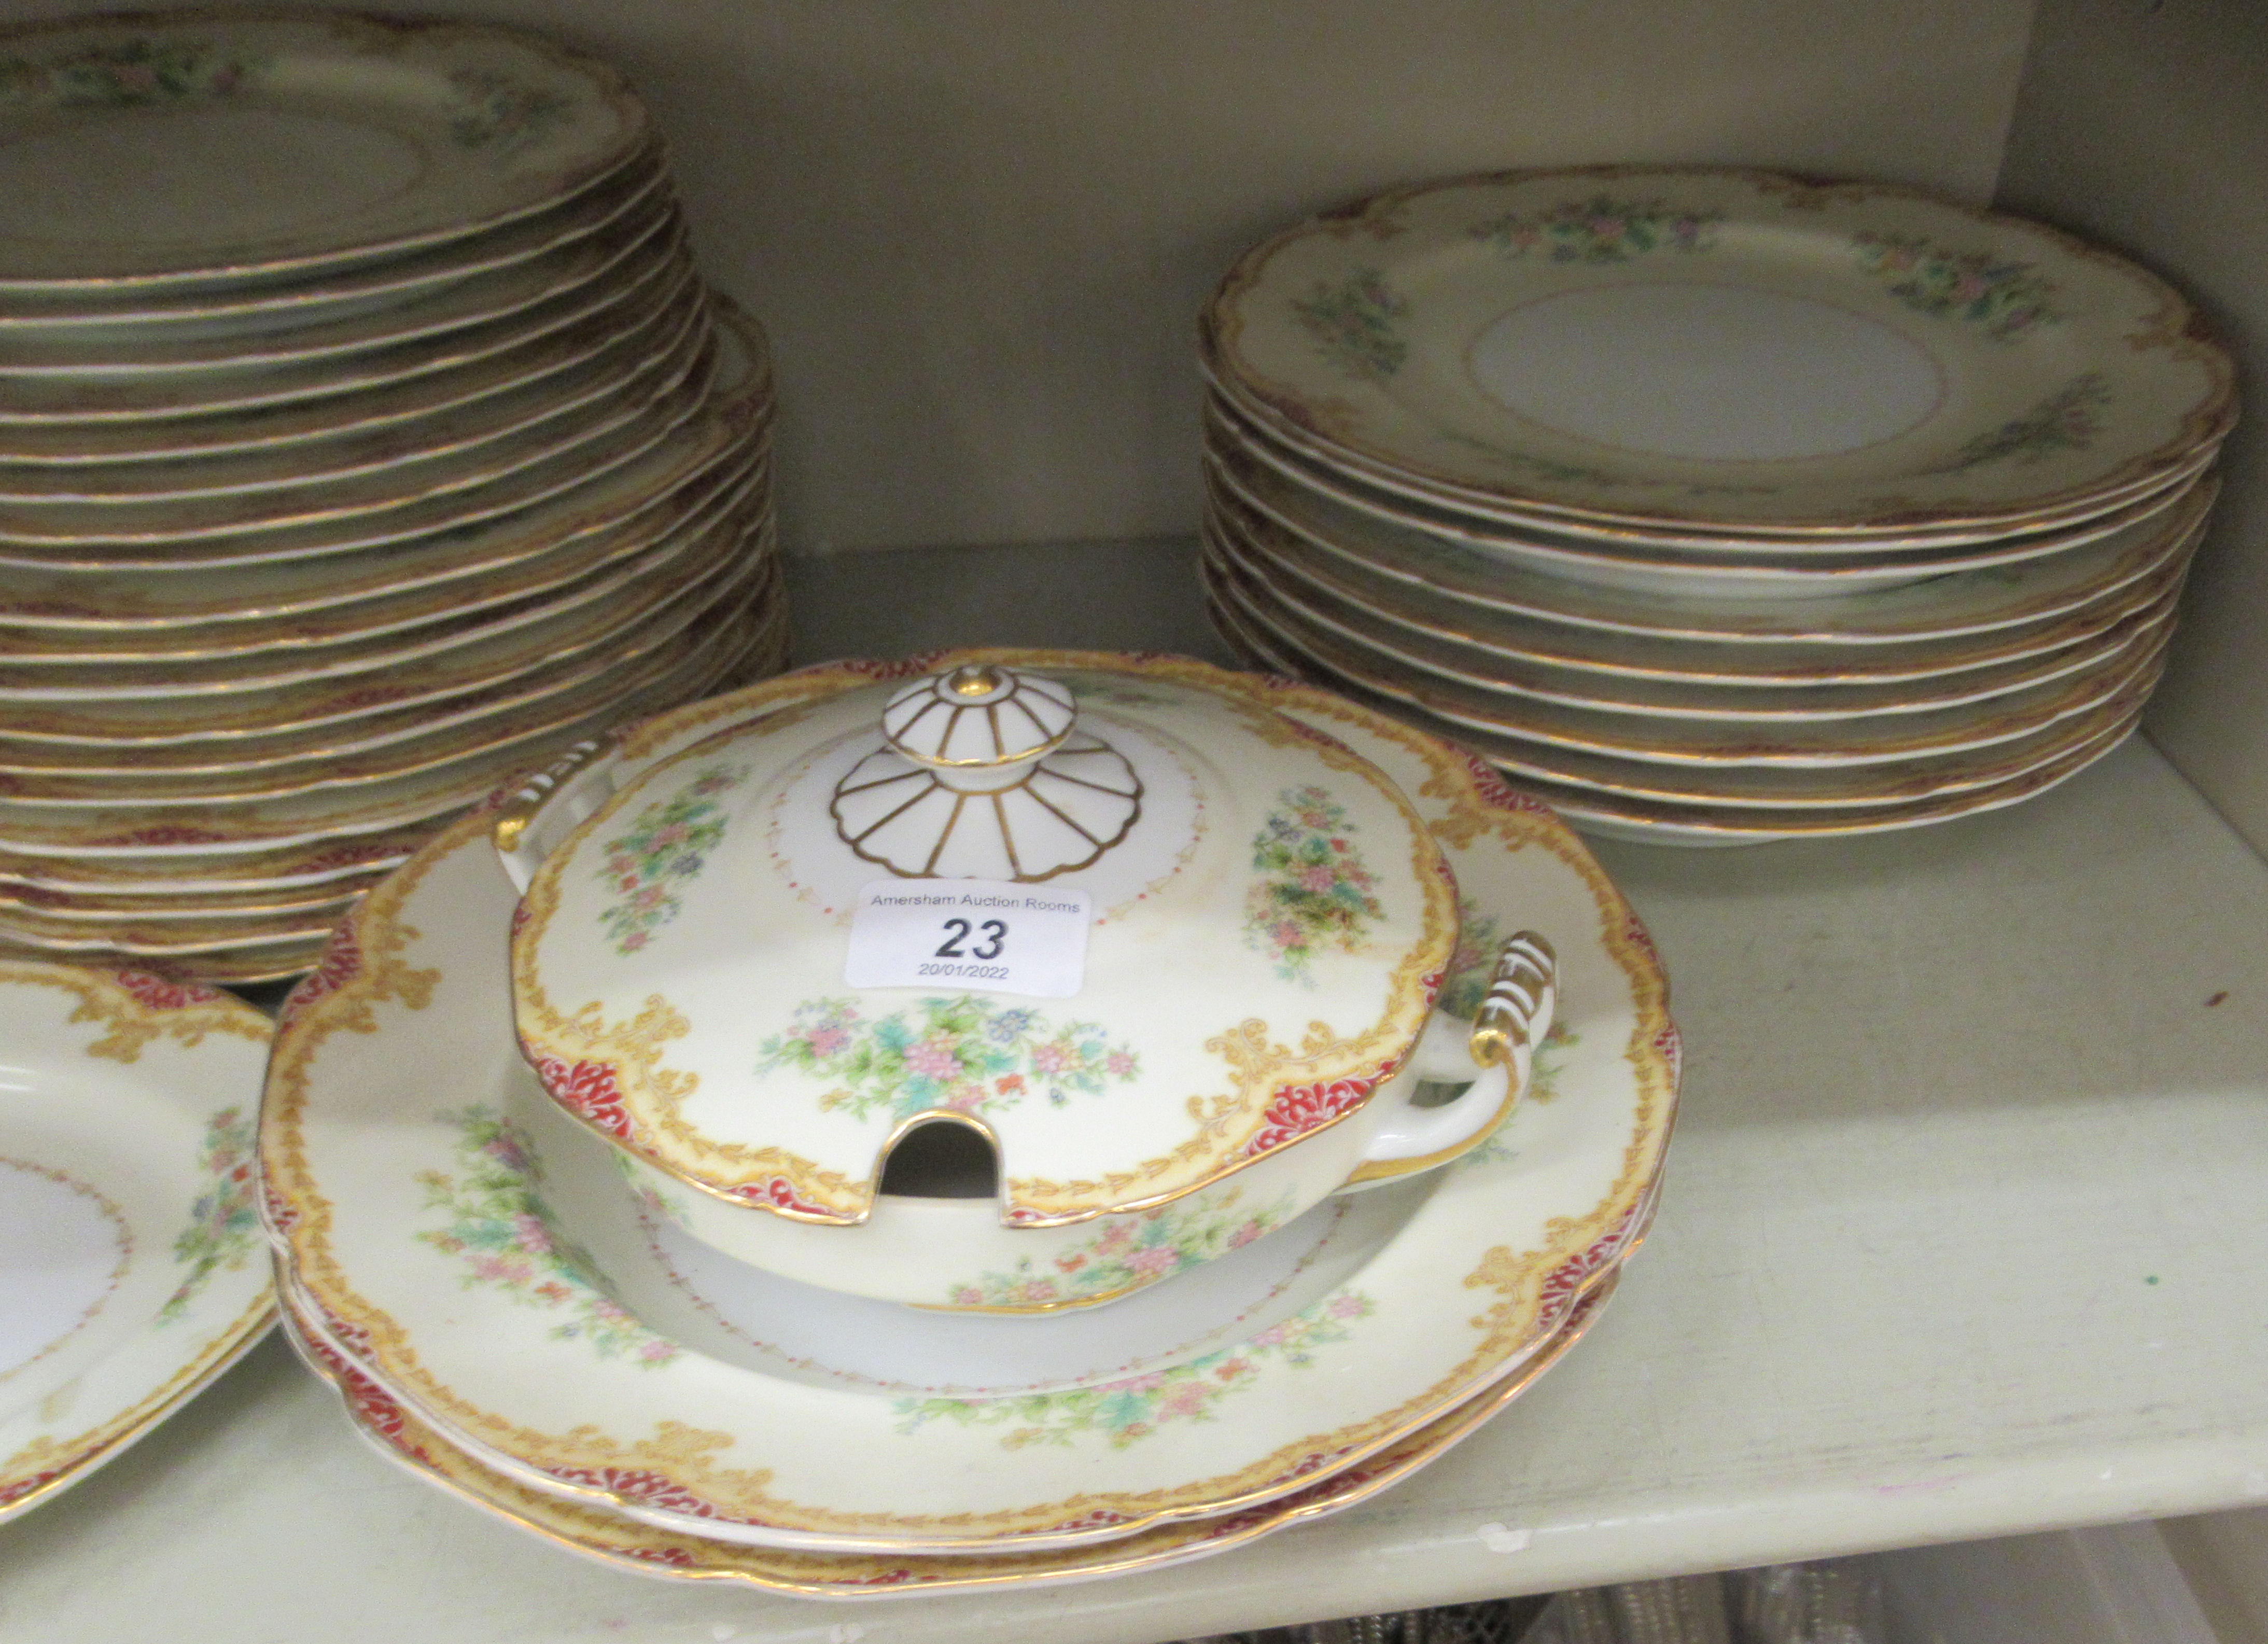 Noritake porcelain tableware, decorated with flora and gilding - Image 3 of 4